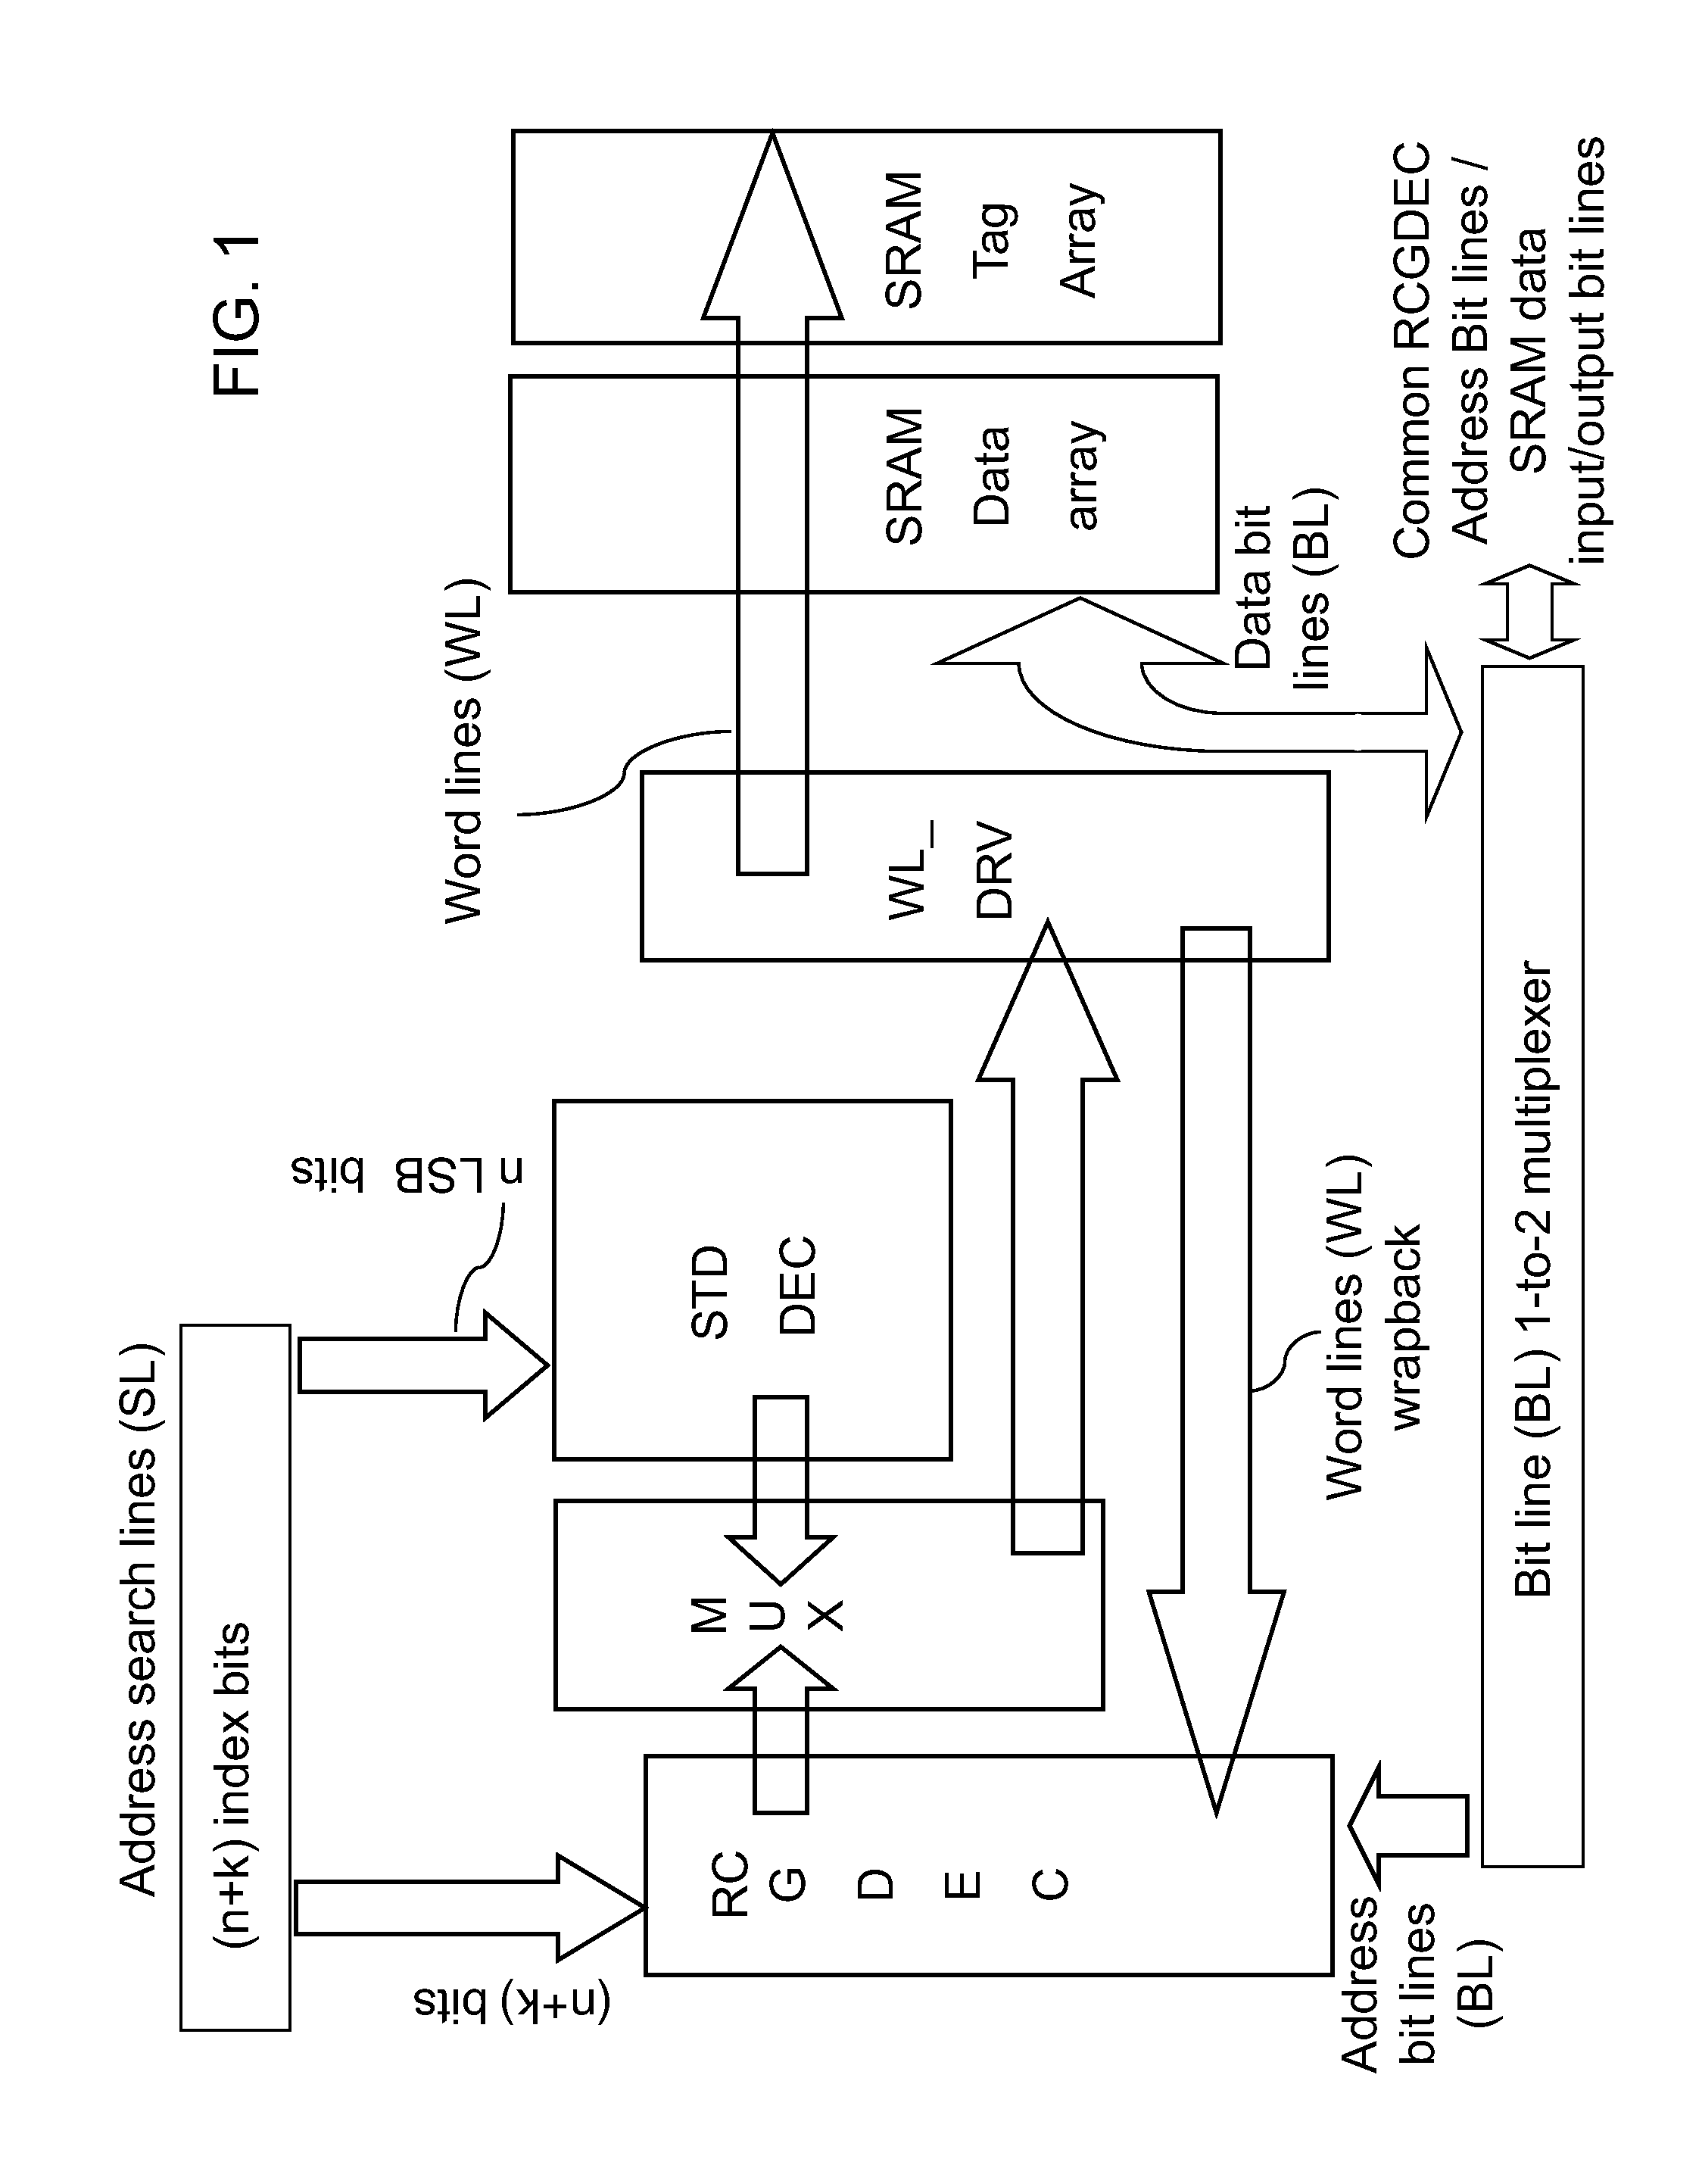 Self-reconfigurable address decoder for associative index extended caches